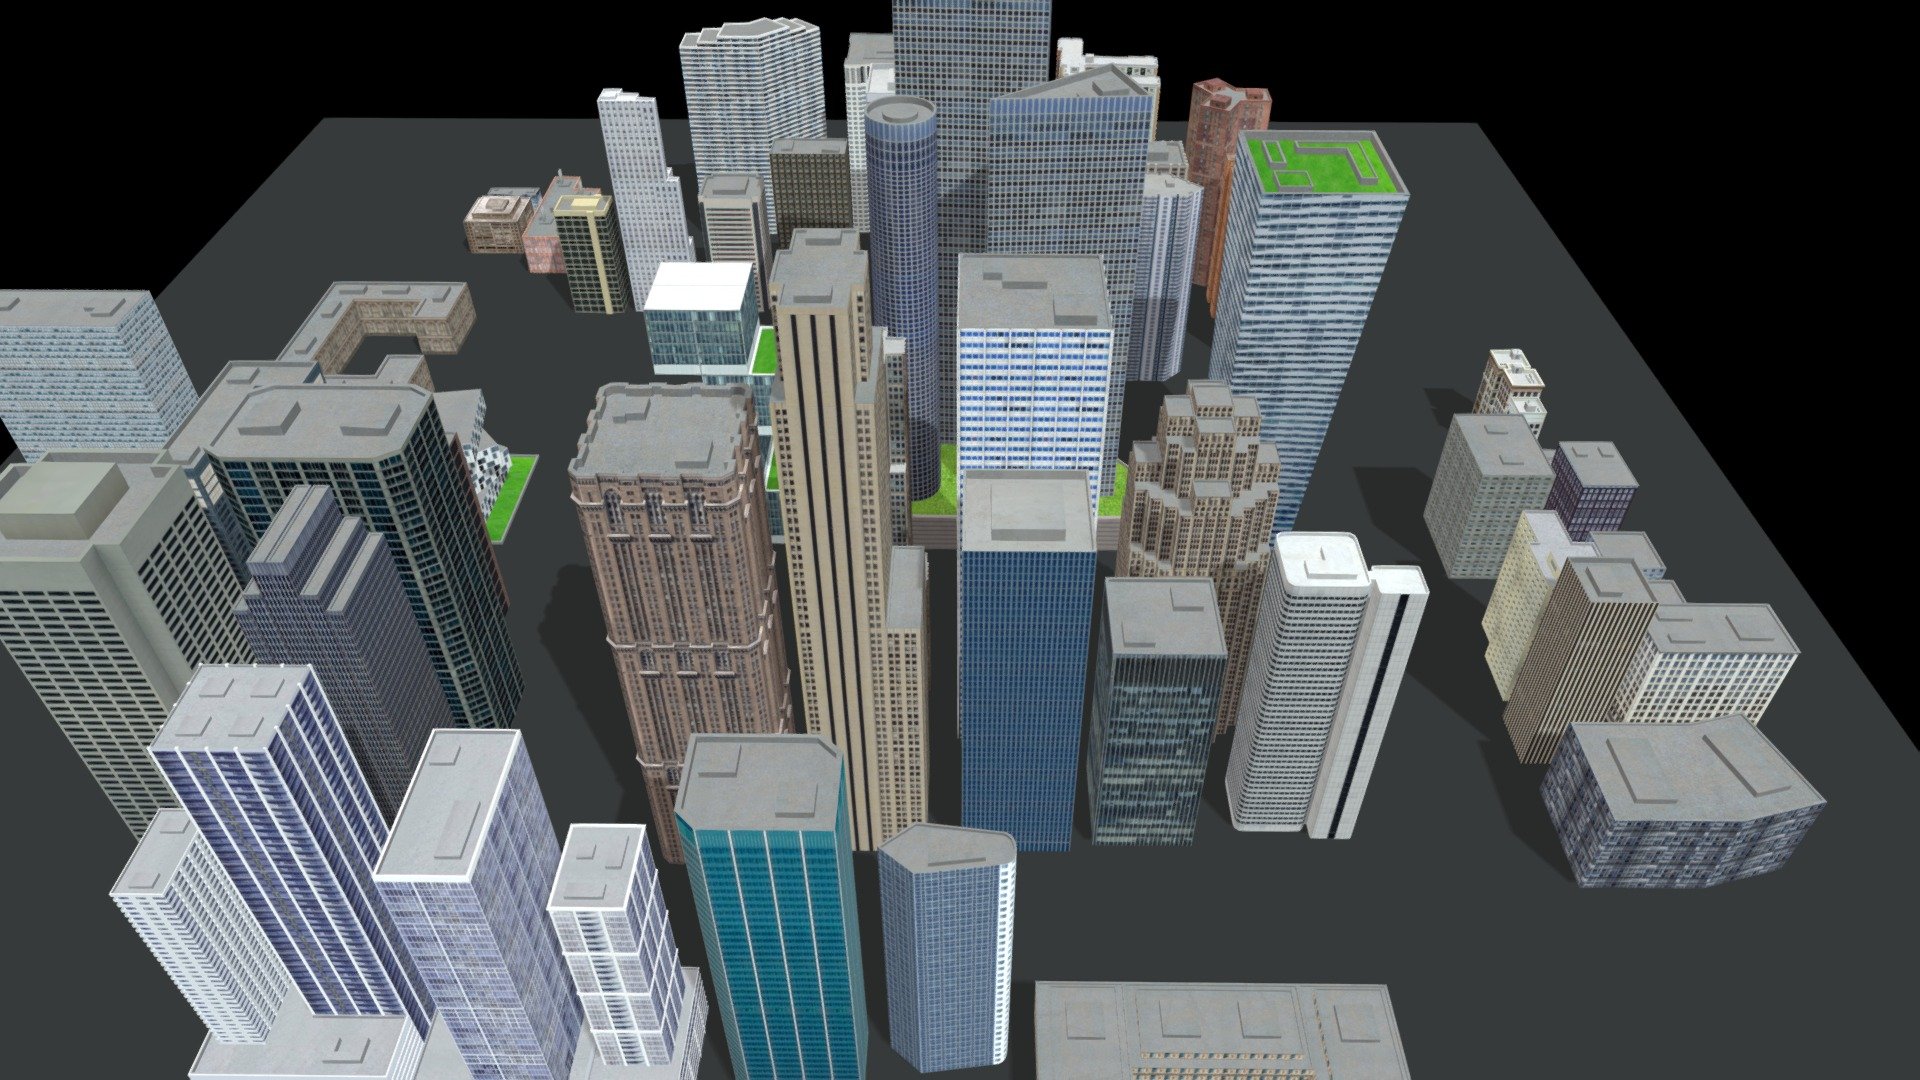 Low poly downtown city district consisting of 50 unique models, suitable for game engines, renders, and animations. Each of the 50 models includes a 2048x2048px or 1024x1024px texture. Buildings include office, residential, heritage, abandoned, and factory 3d model